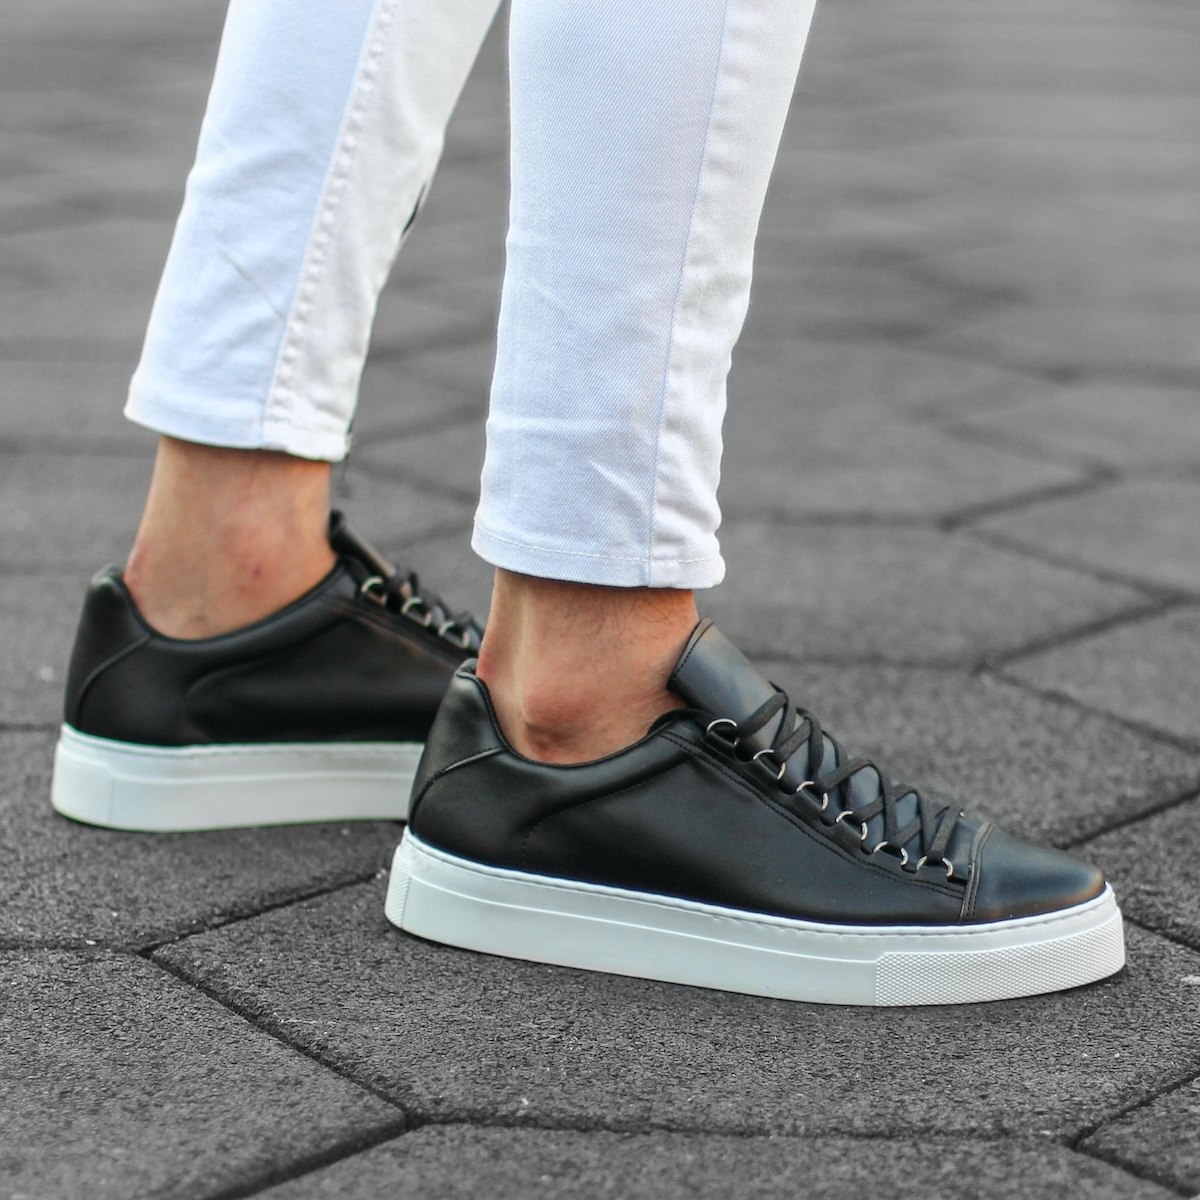 White Sneakers - Designer Shoes for Men - FARFETCH